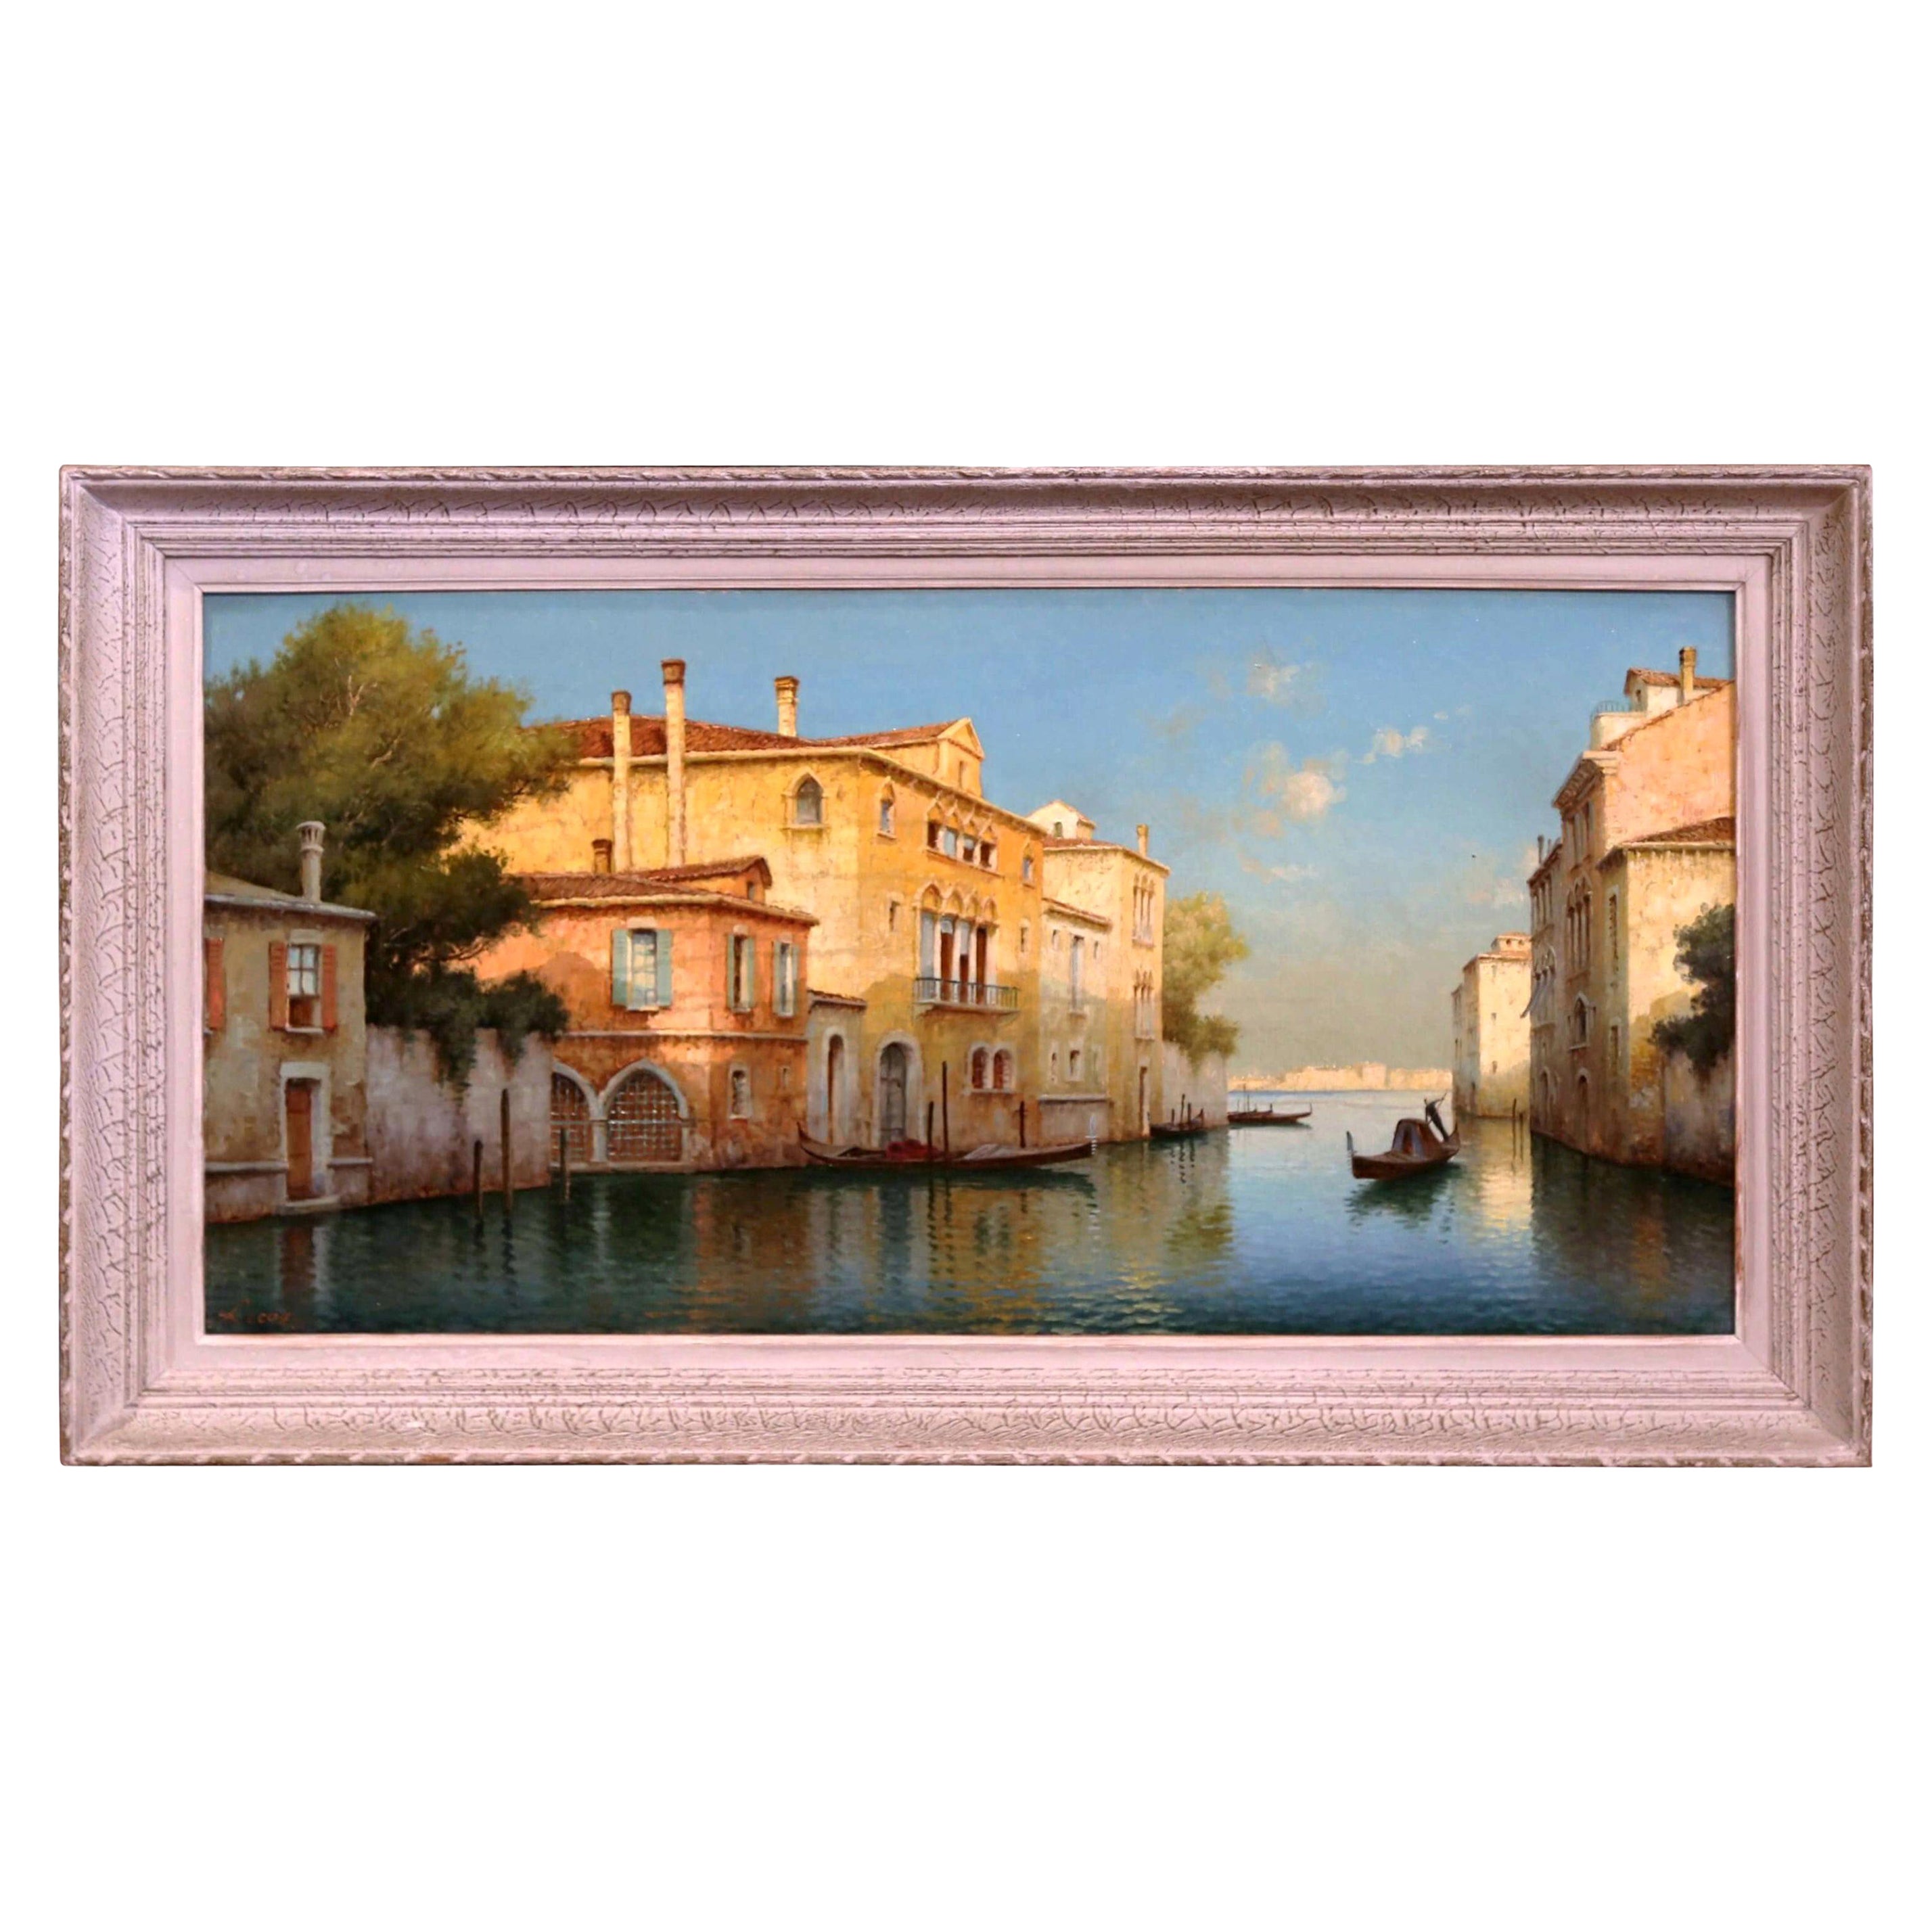 Early 20th Century French Framed Sunset in Venice Oil Painting Signed A. Lecoz For Sale